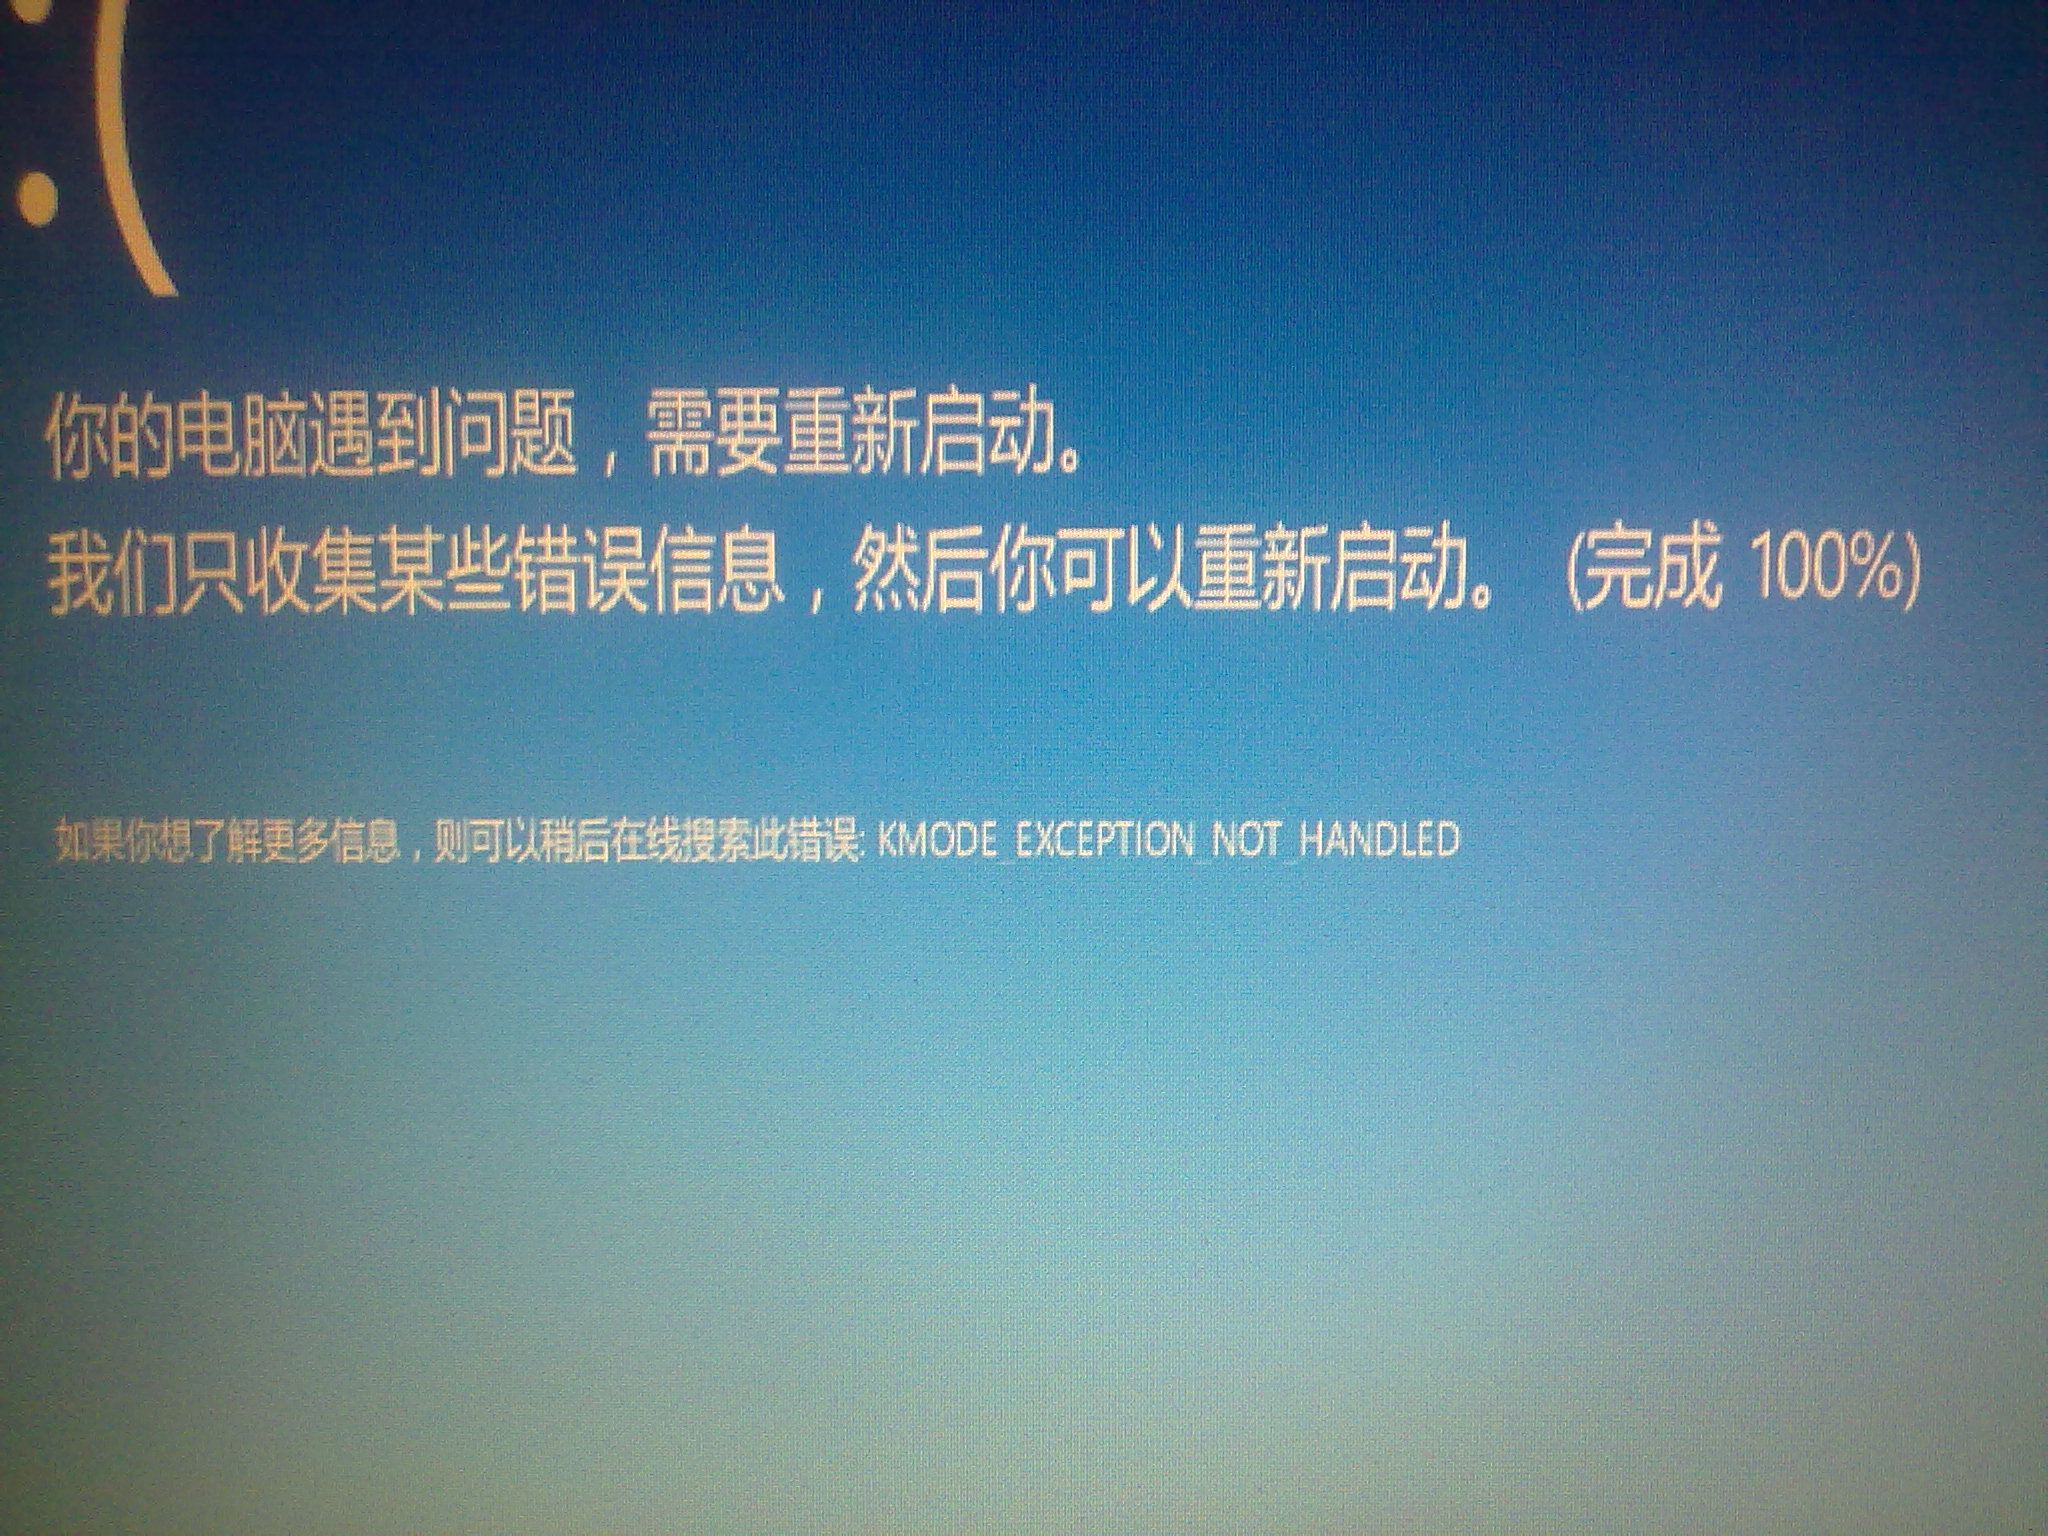 win10 英雄联盟 蓝屏 kmode  exception